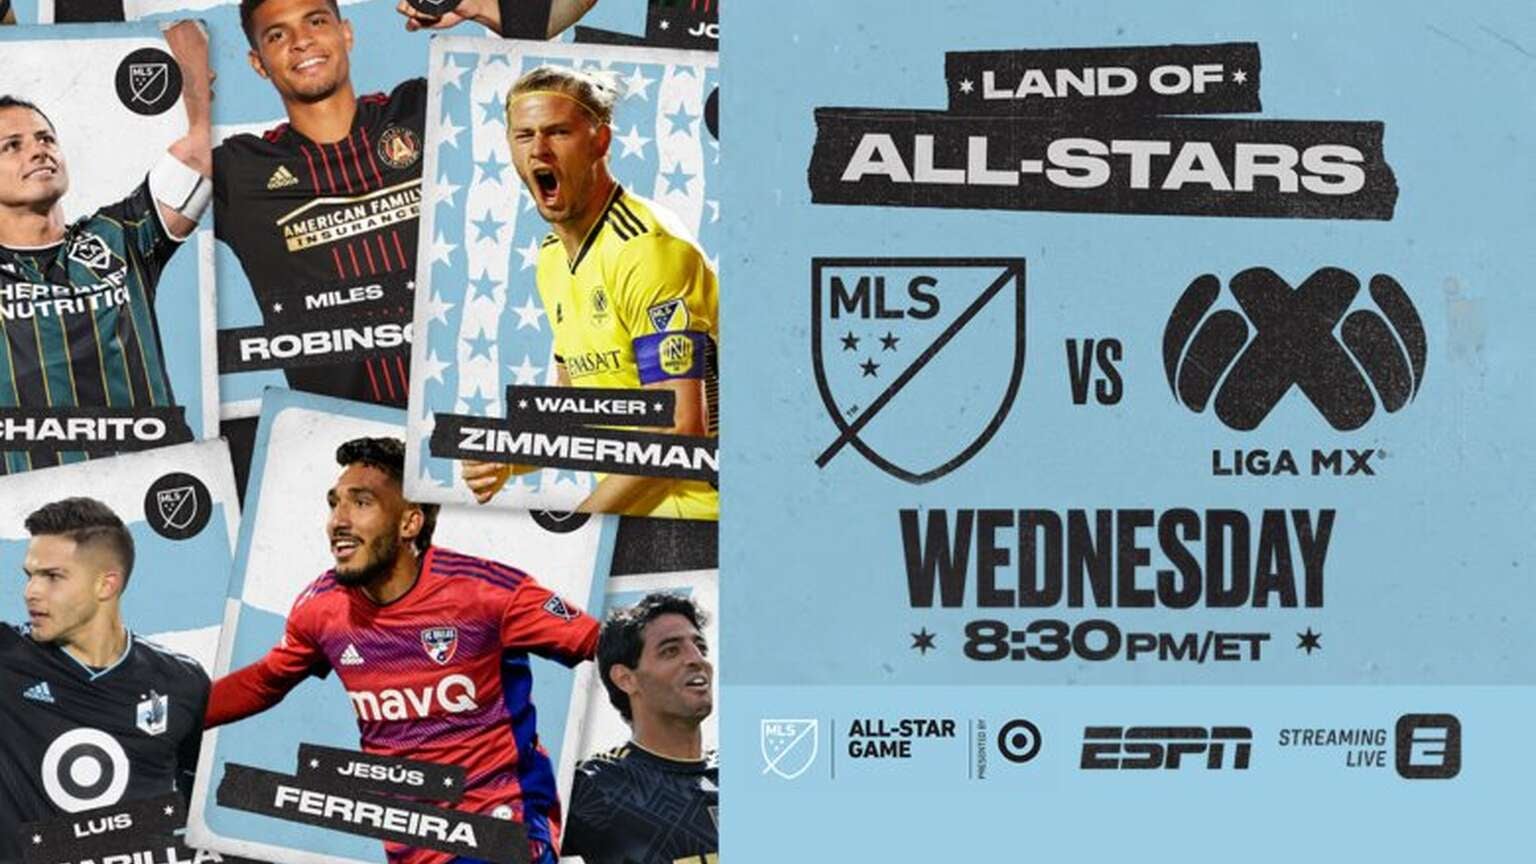 How to Watch the 2022 MLS AllStar Game Live for Free Without Cable